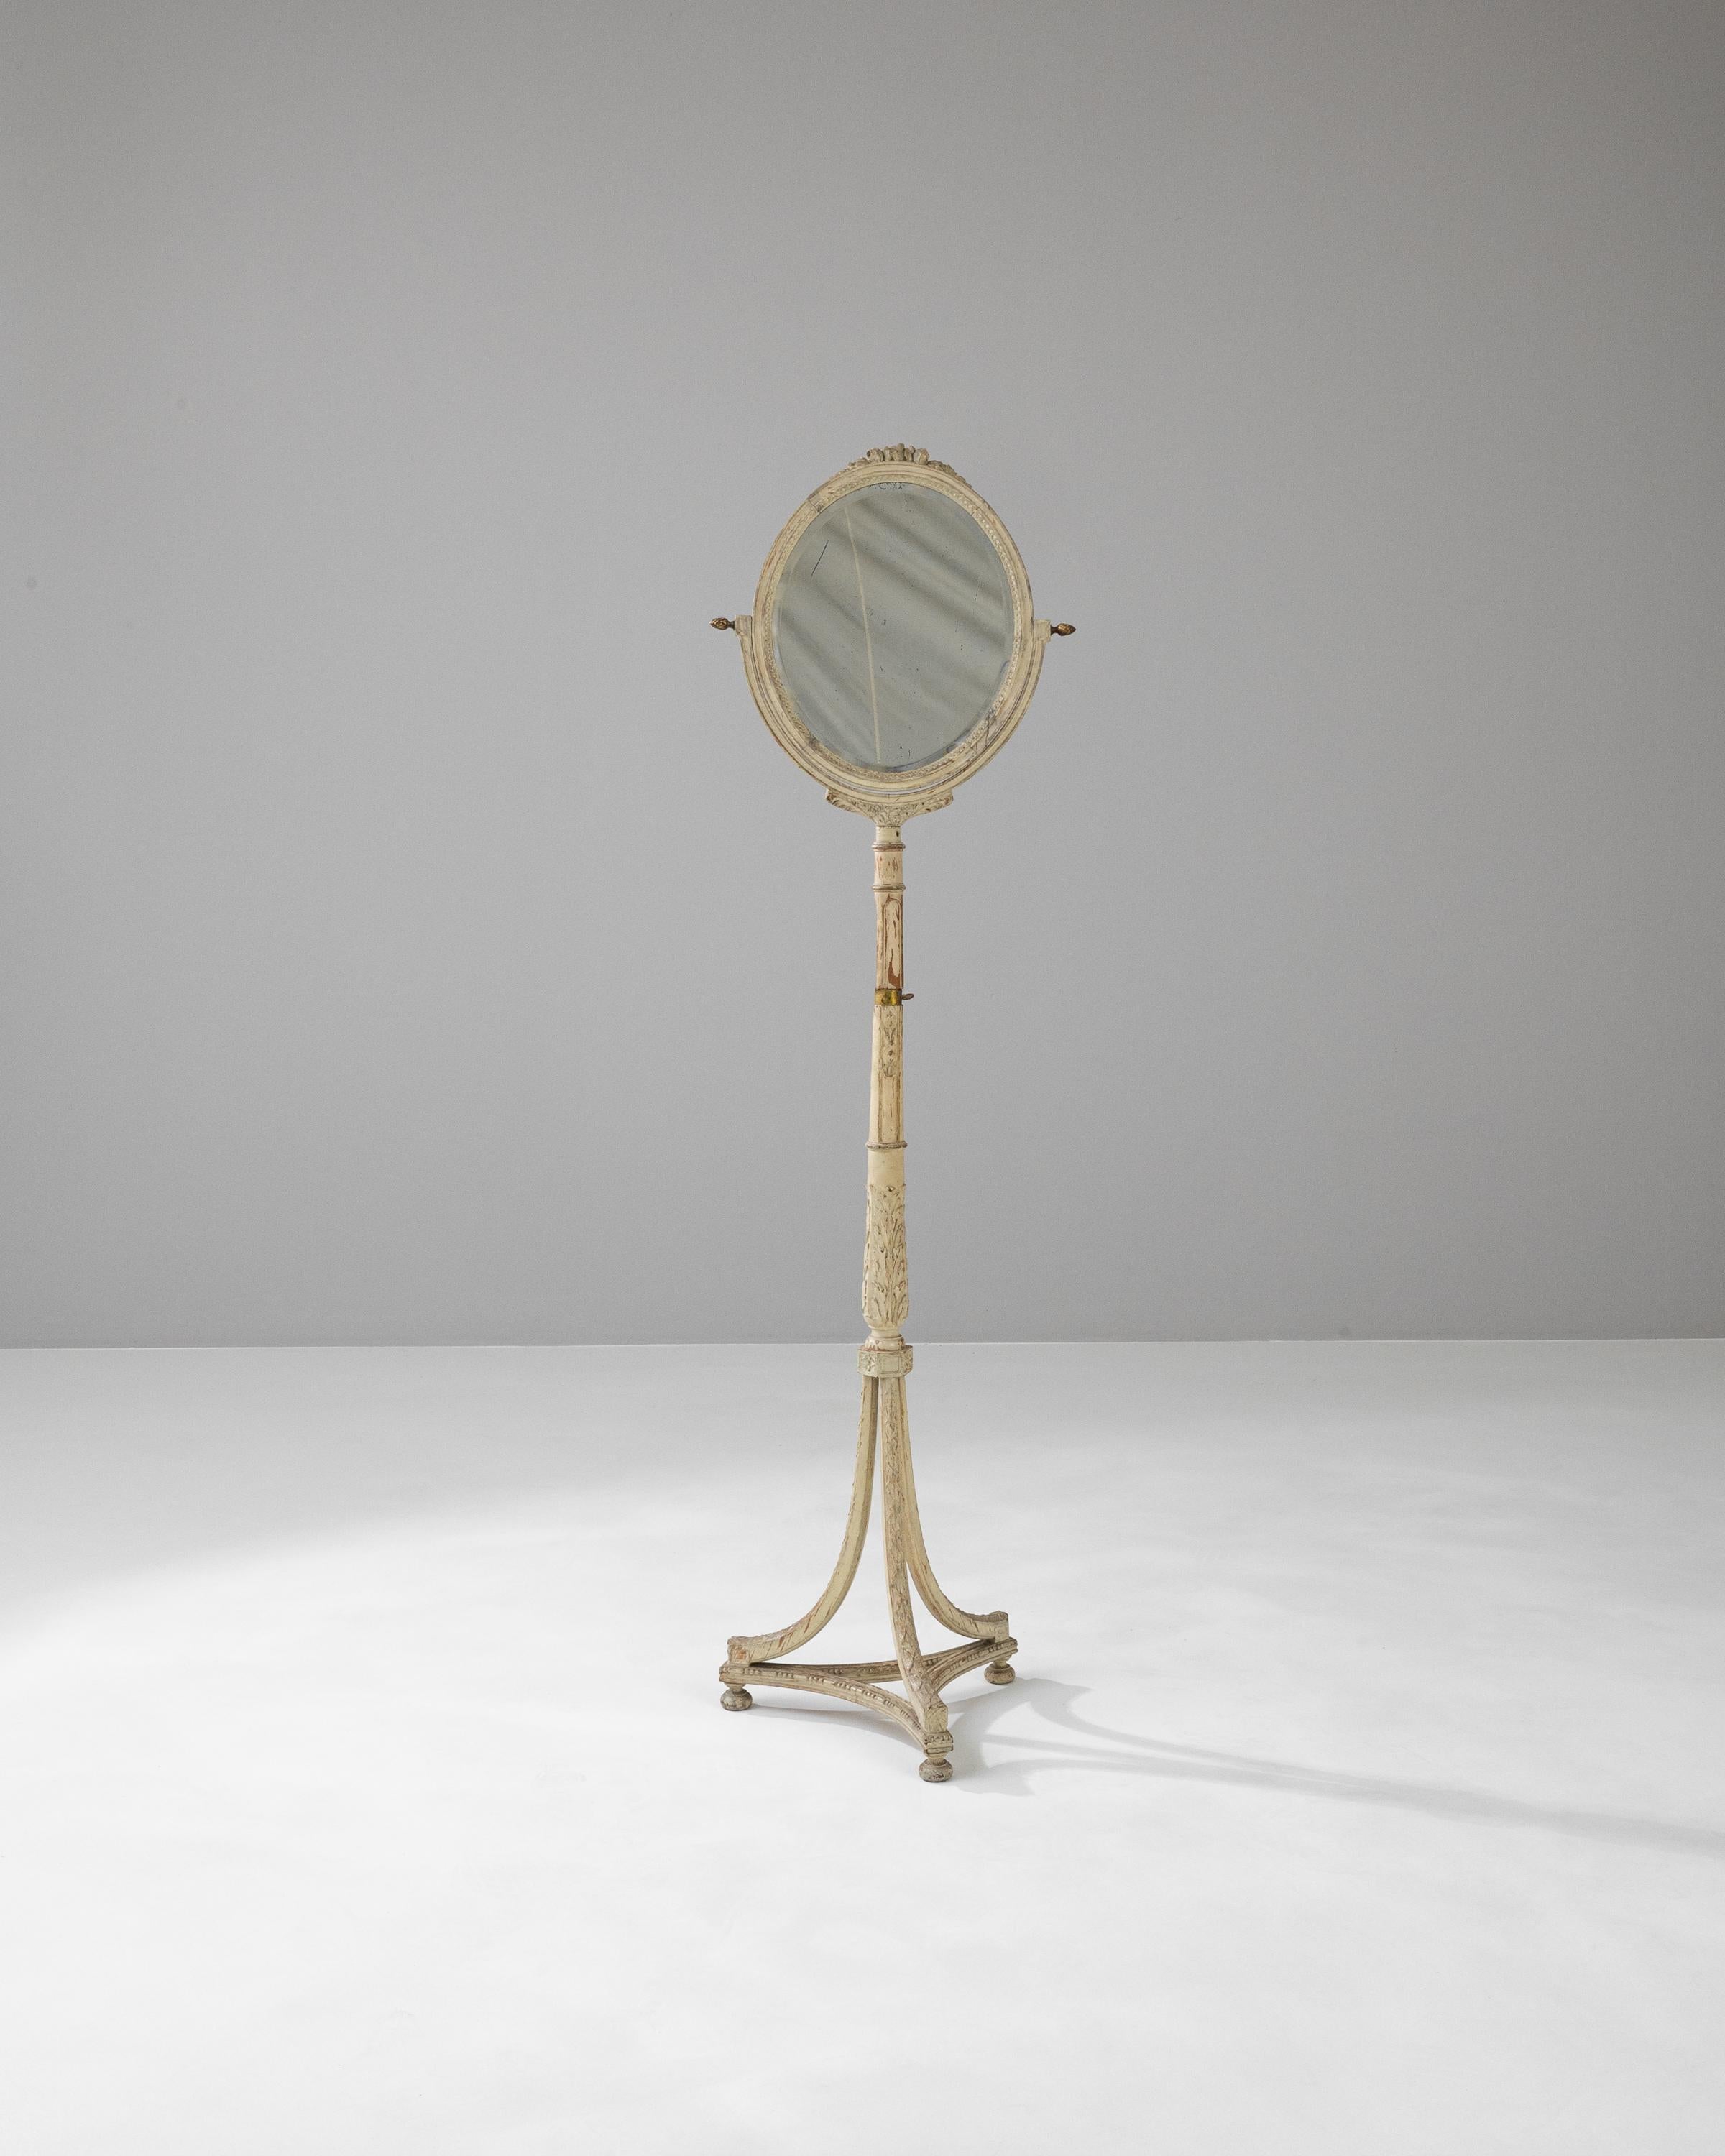 Step back into the elegance of the 19th Century with this exquisite French Wooden Floor Mirror. A statement piece of refined beauty, it features a gracefully aged white patina finish that enhances the intricate carvings along its frame and stand.